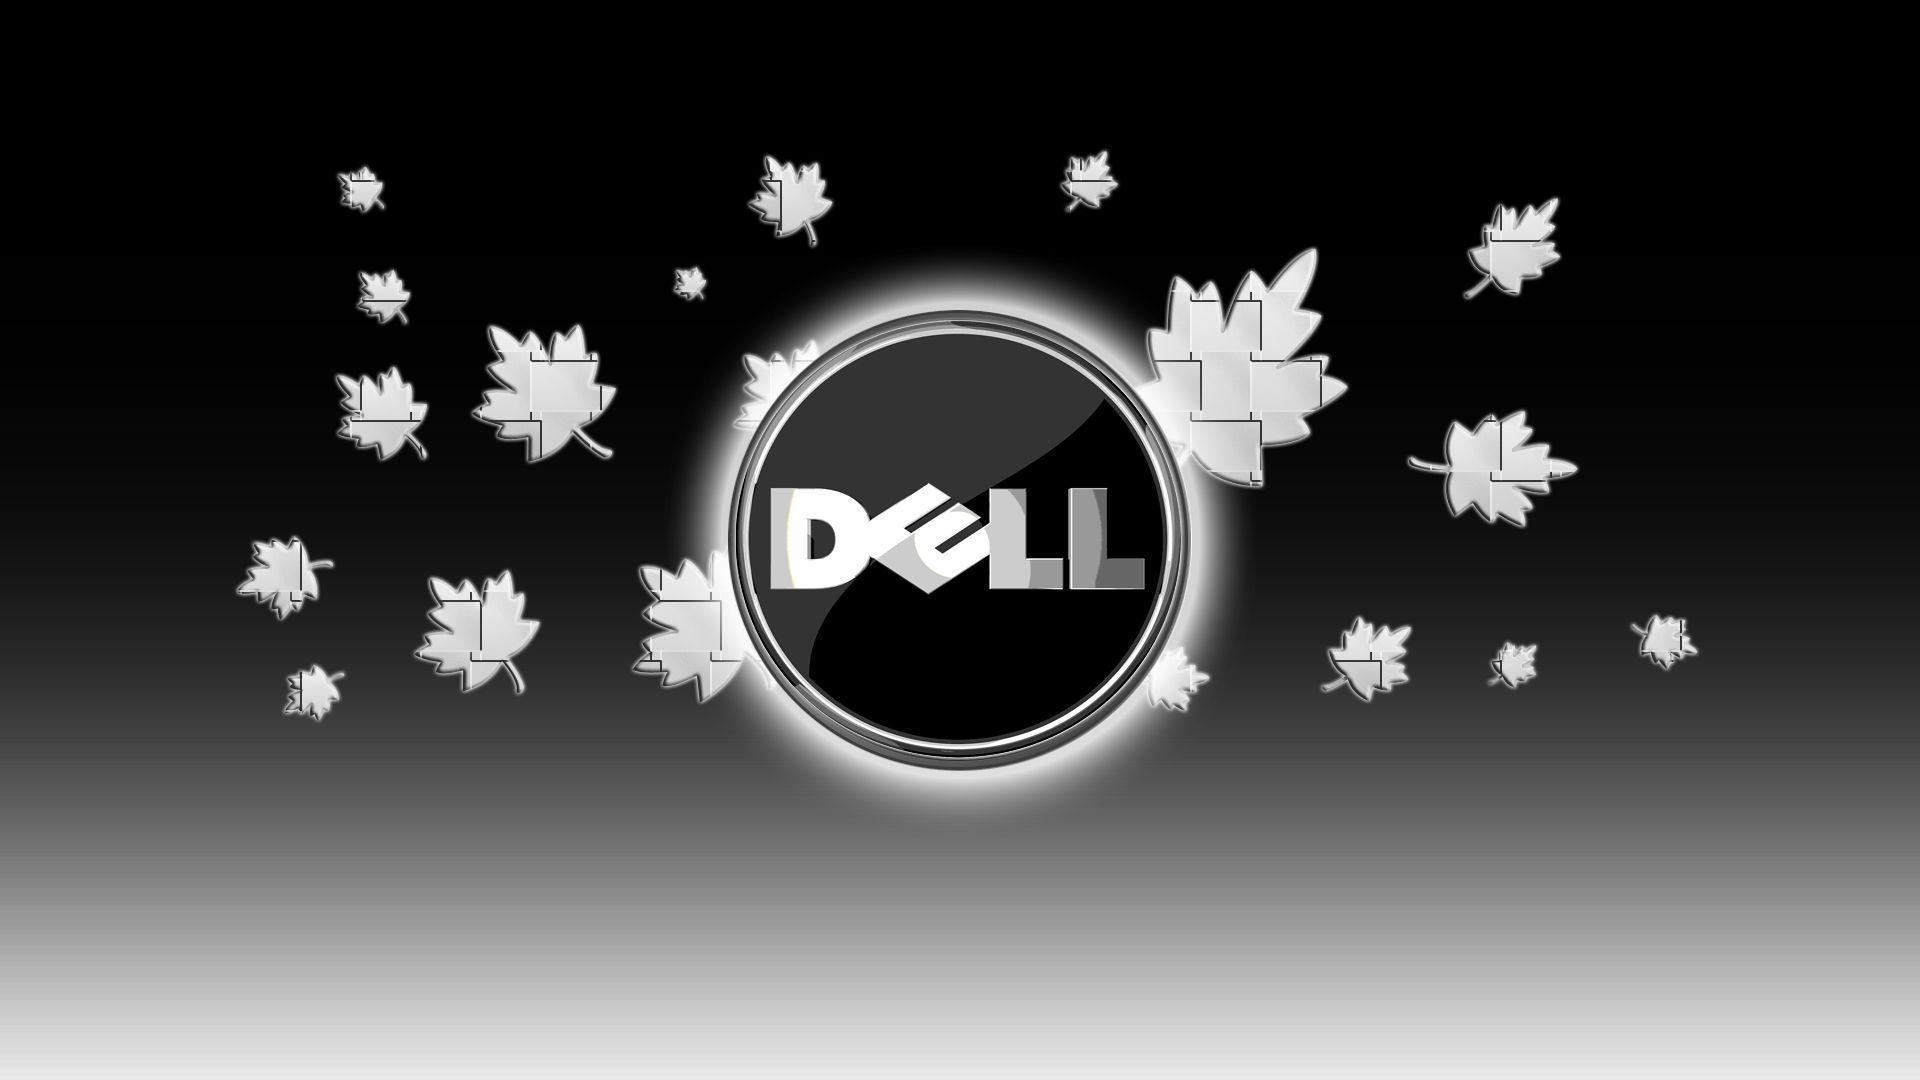 Dell 1080P Wallpaper & Full Quality Background